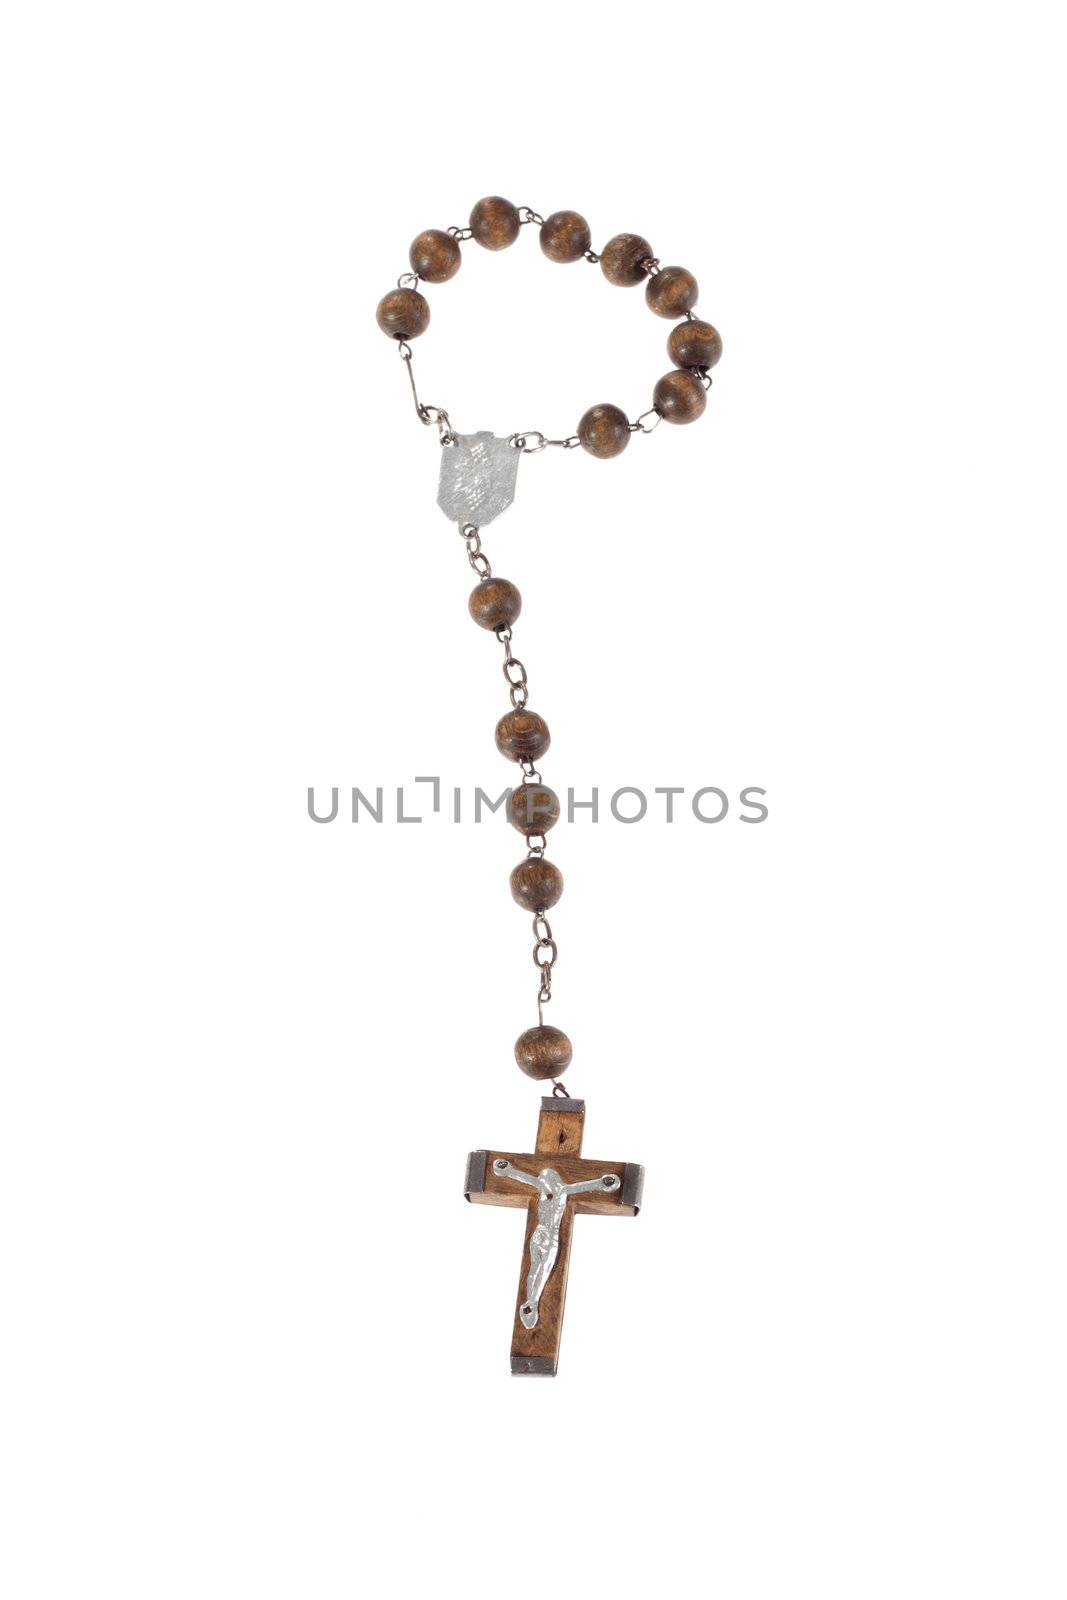 Wooden rosary beads, isolated on the white